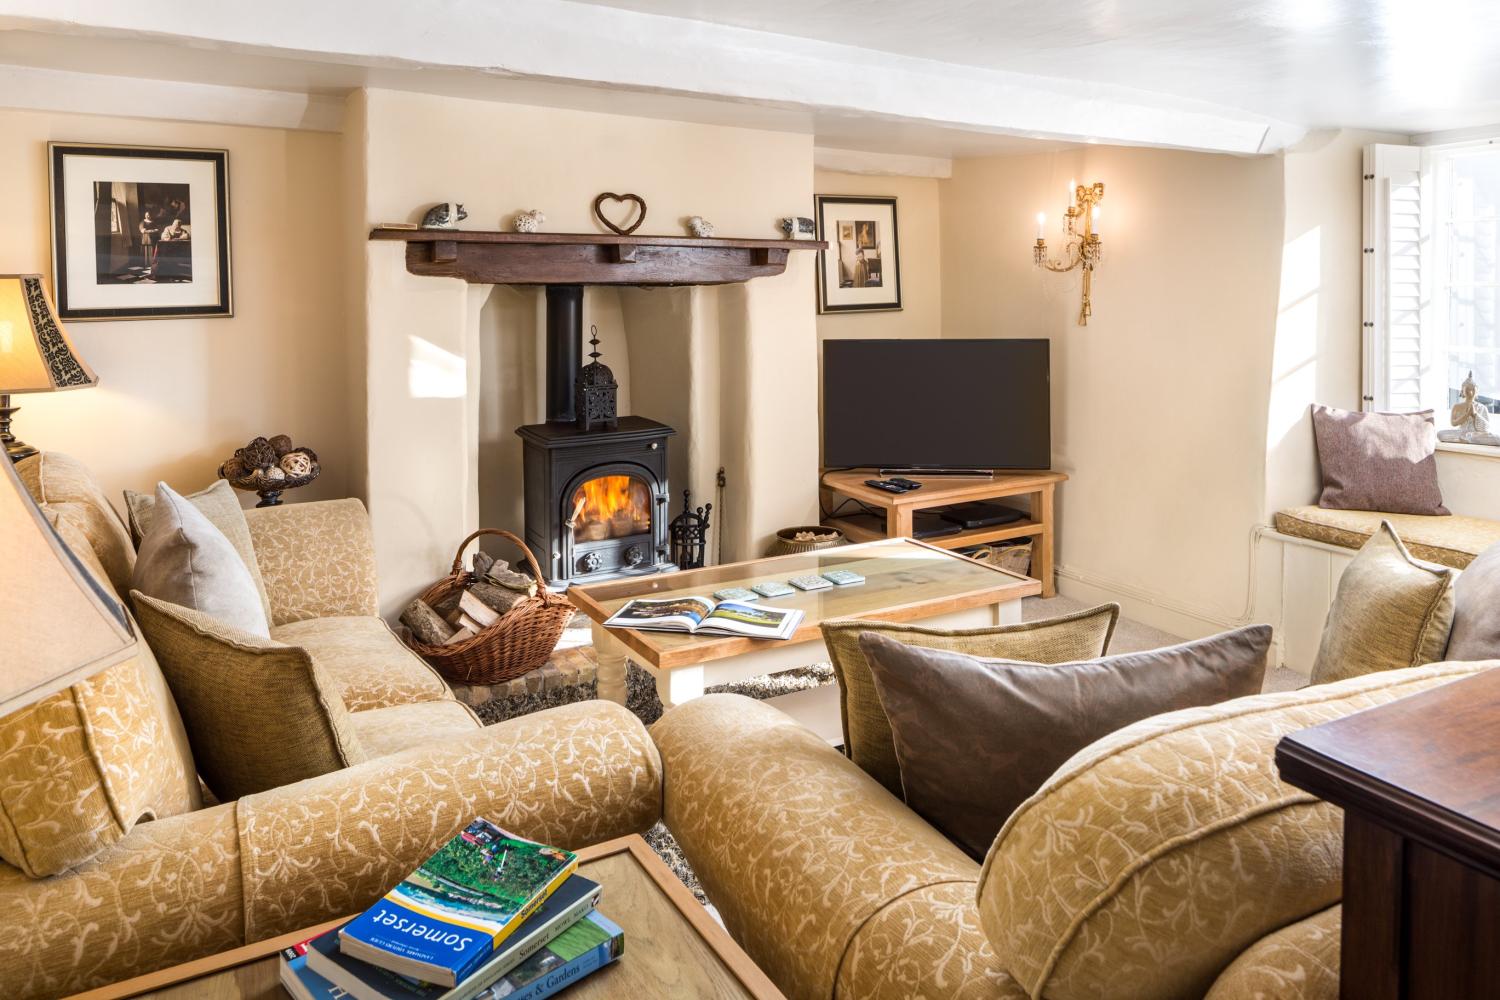 The living room has a wood burning stove and plenty of seating for everyone.